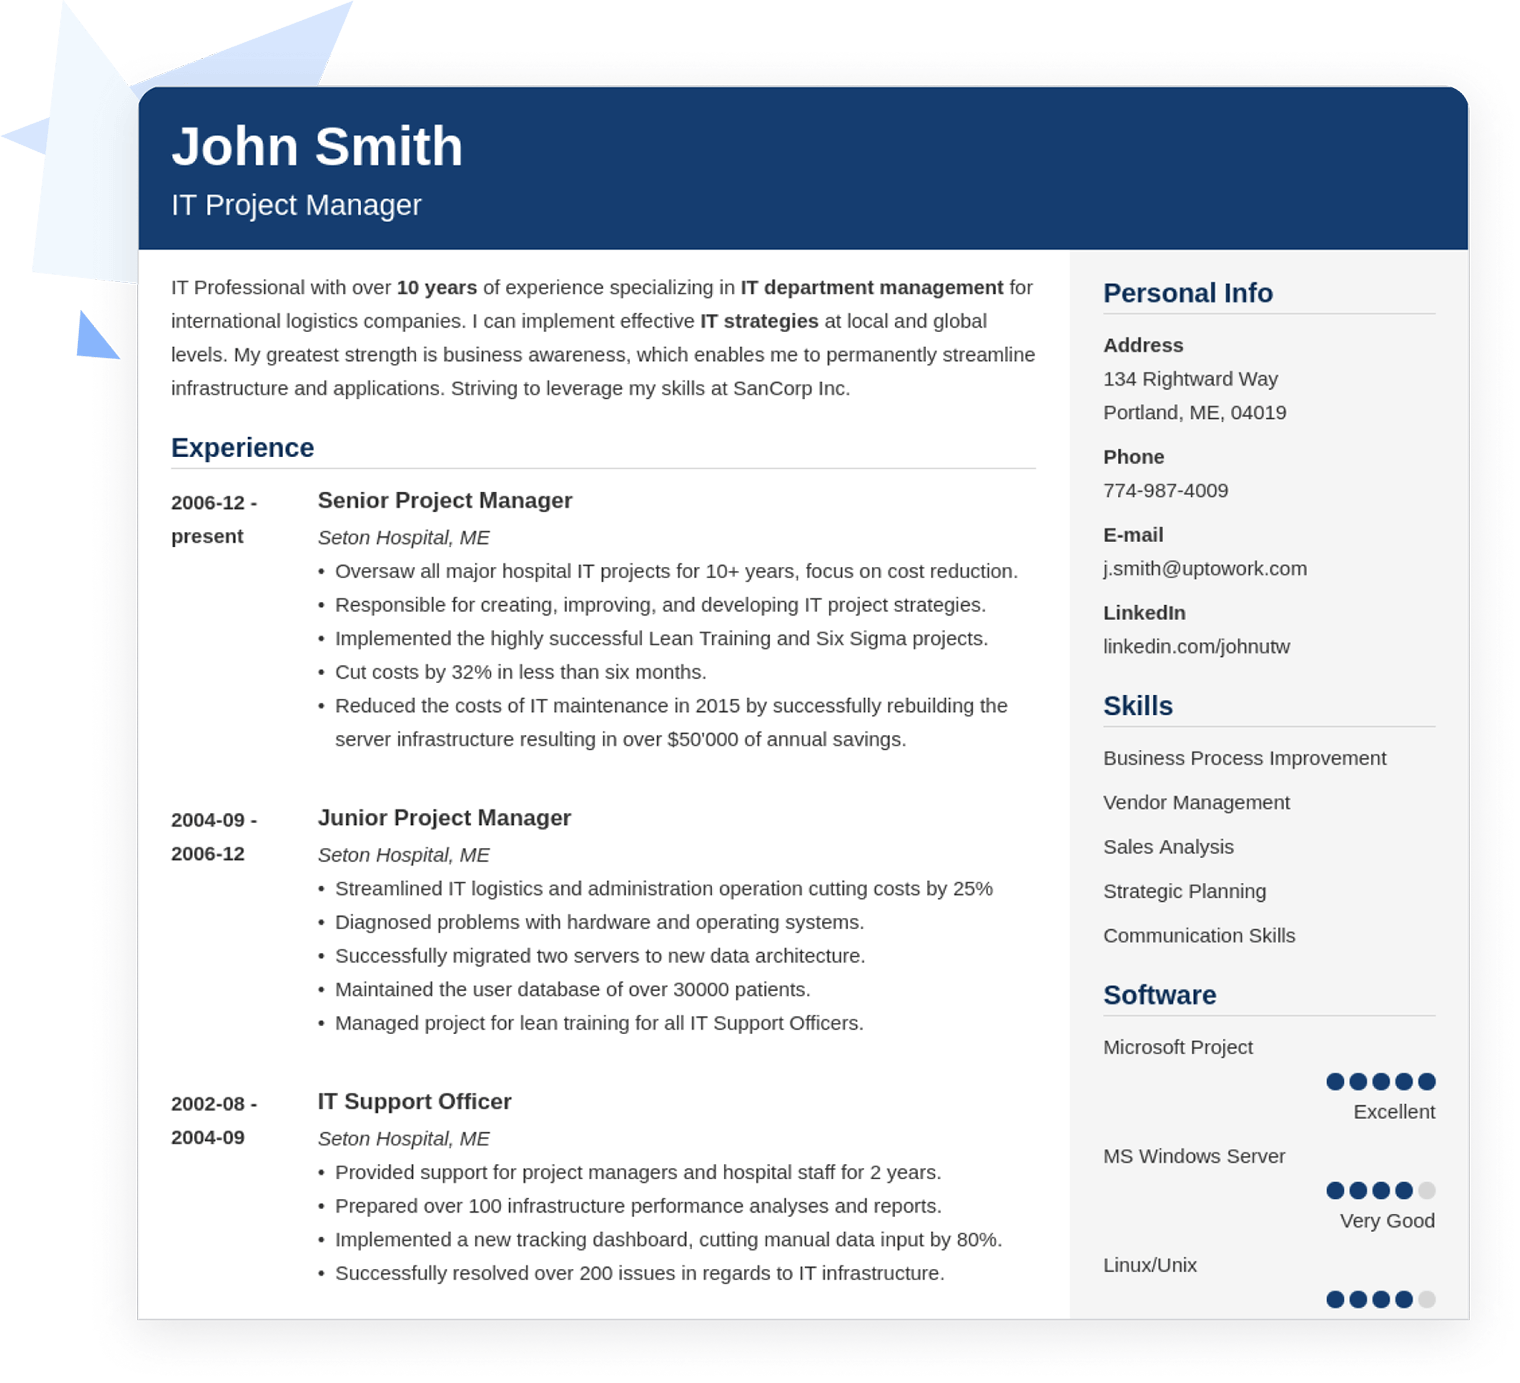 Free Resume Sites from cdn-images.zety.com